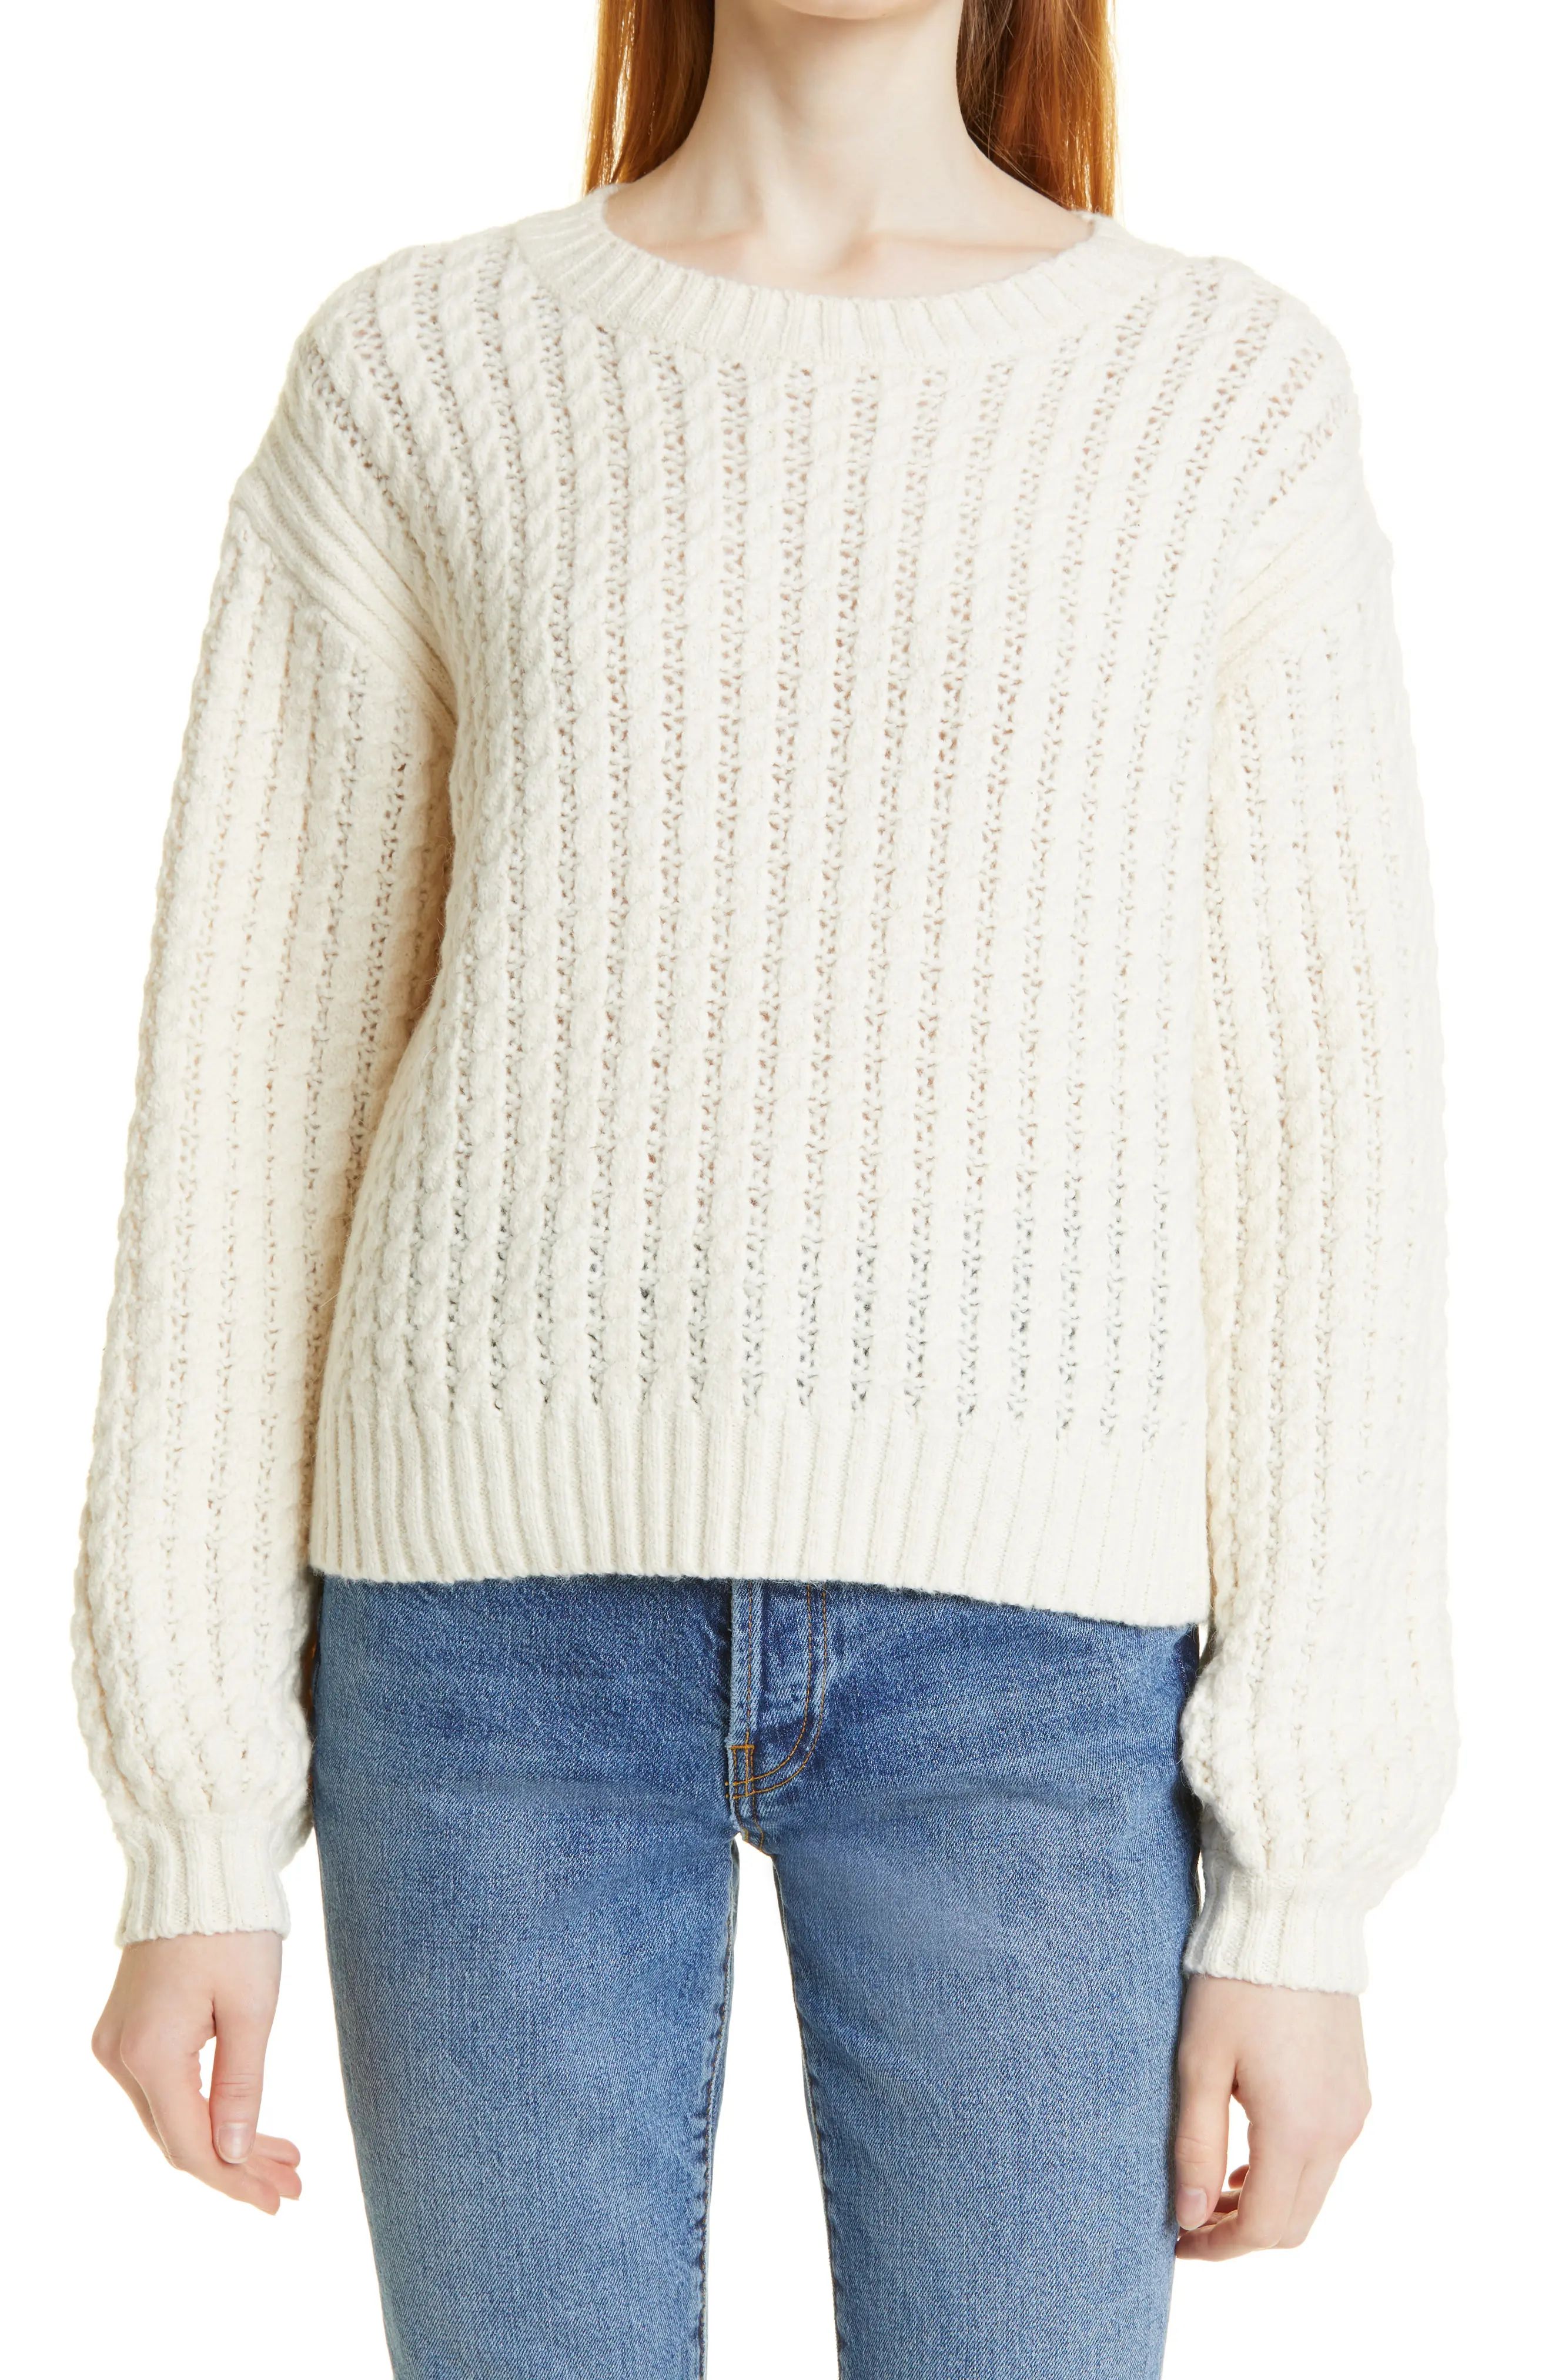 LINE Janie Cotton & Alpaca Blend Baby Cable Sweater, Size X-Small in Chalk at Nordstrom | Nordstrom